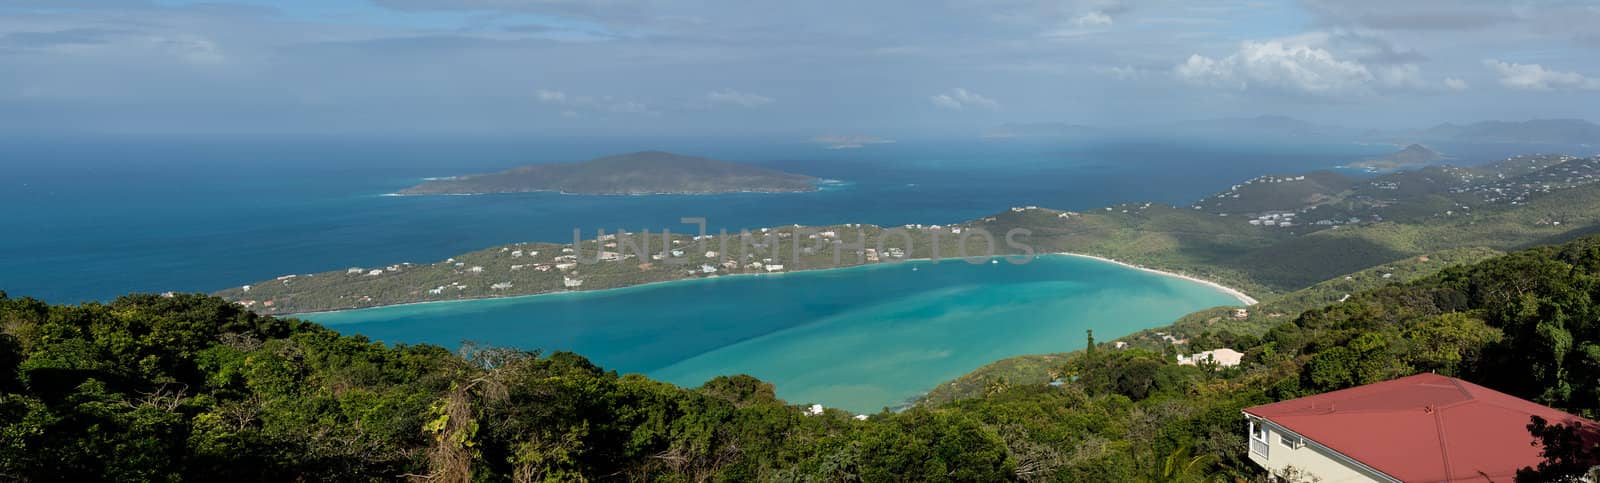 Panoramic view of Magens Bay by steheap